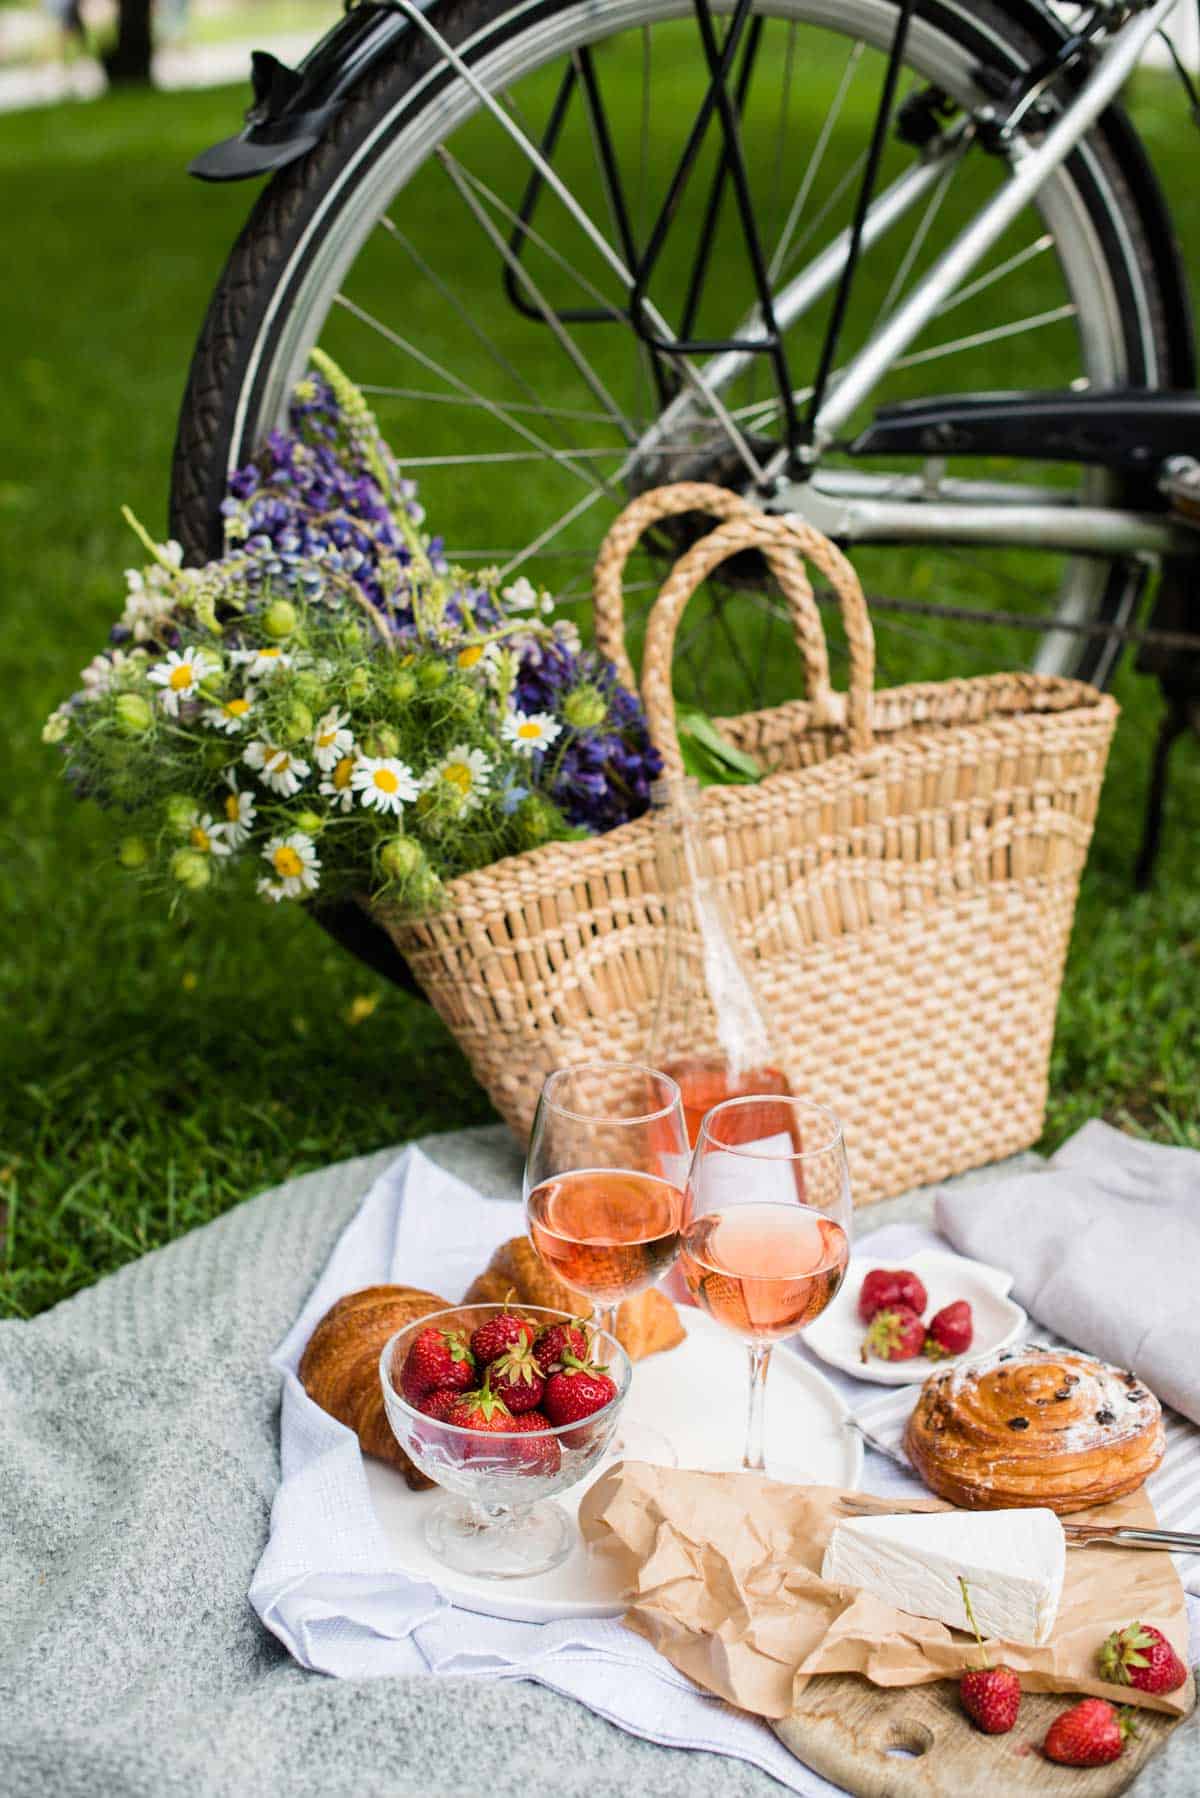 A spring picnic with flowers in a basket leaning against a bicycle. 